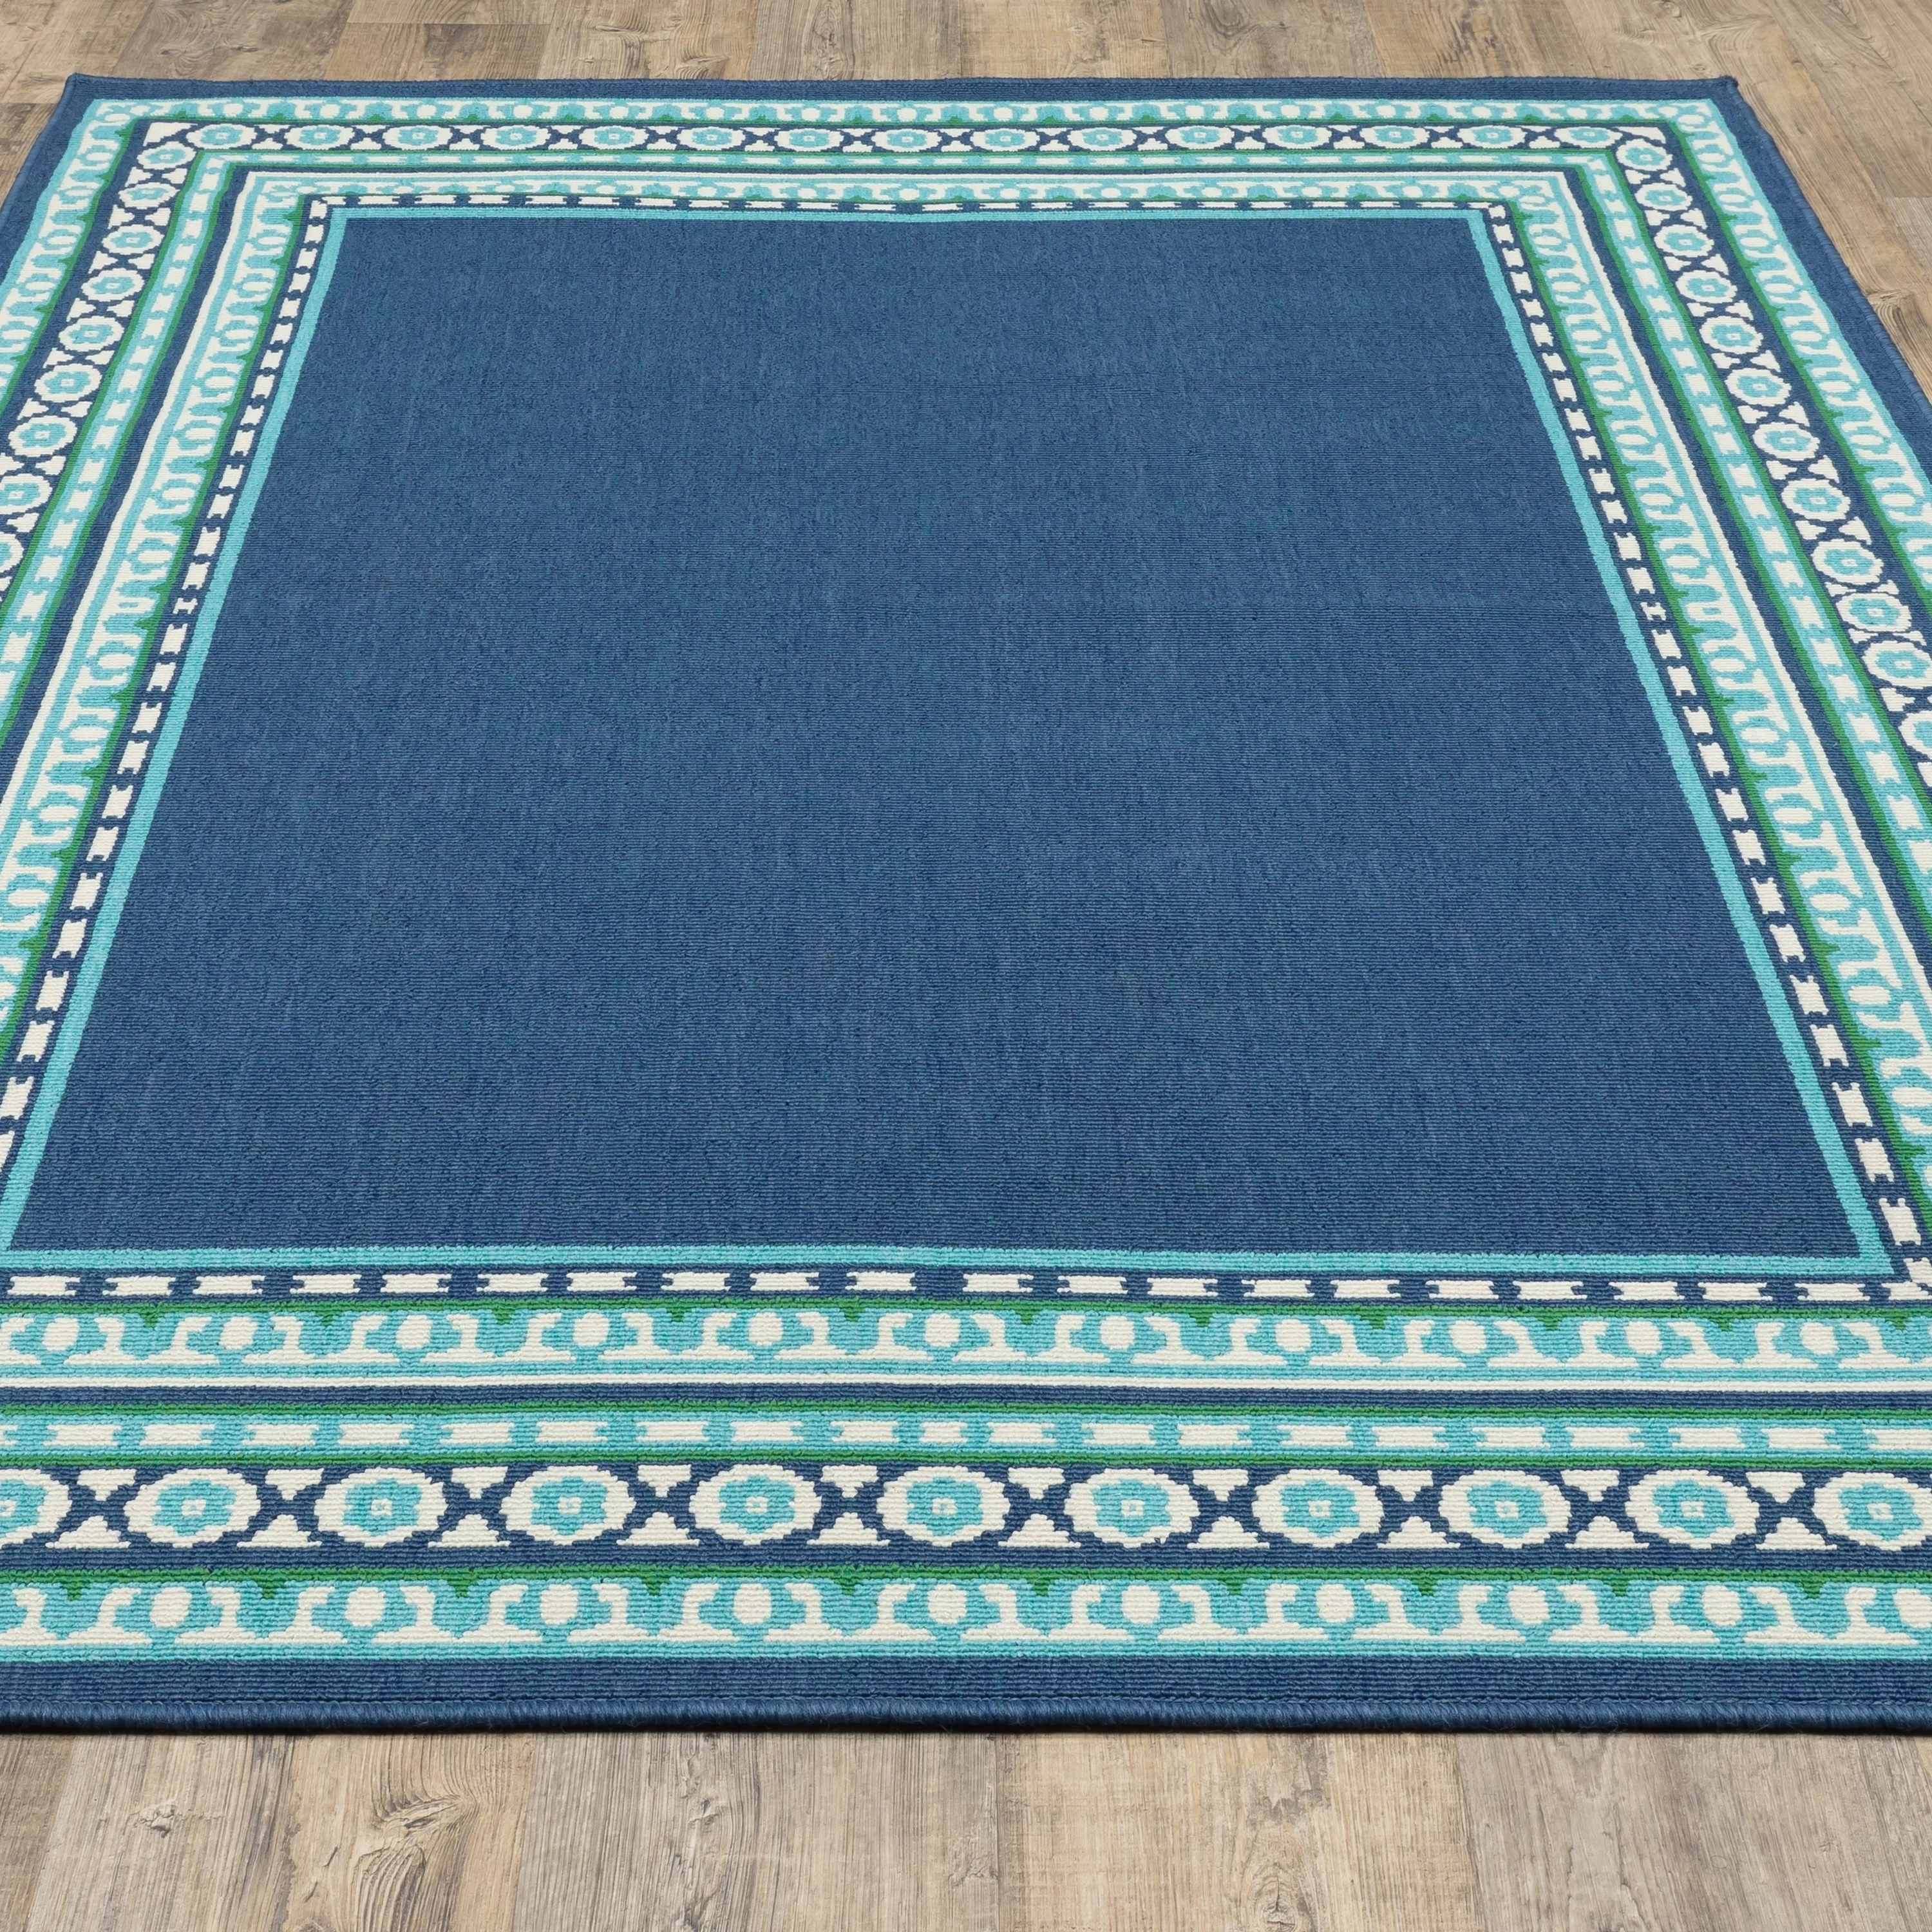 a turquoise and blue southwestern rug on a hardwood floor